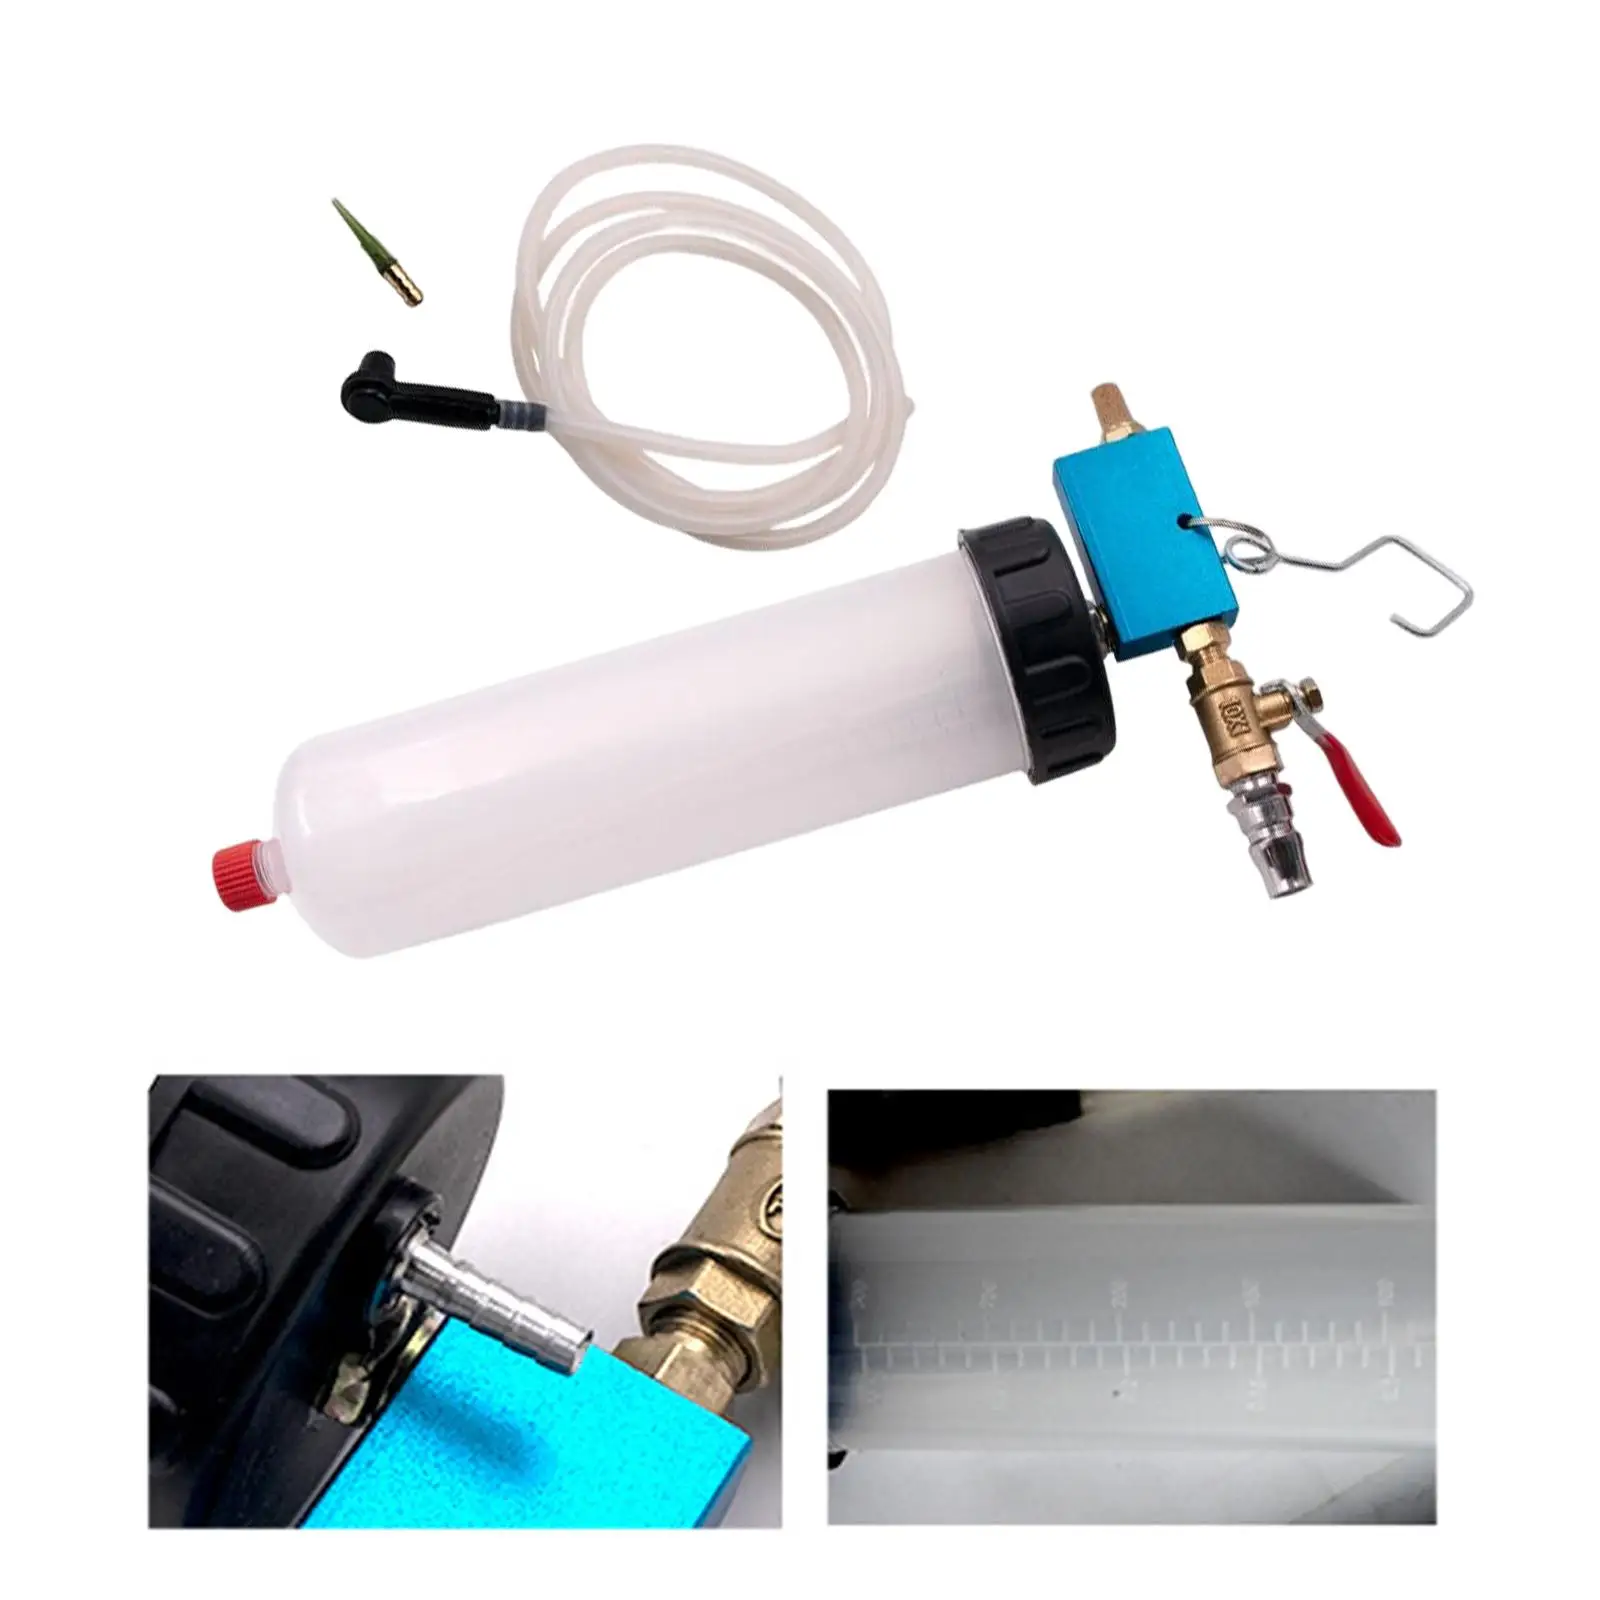 Universal Auto Brake  Extractor Pneumatic Evacuator Equipment Kit Brake Clutch  Drained Bleeder Tool for Motorcycle Truck Car.